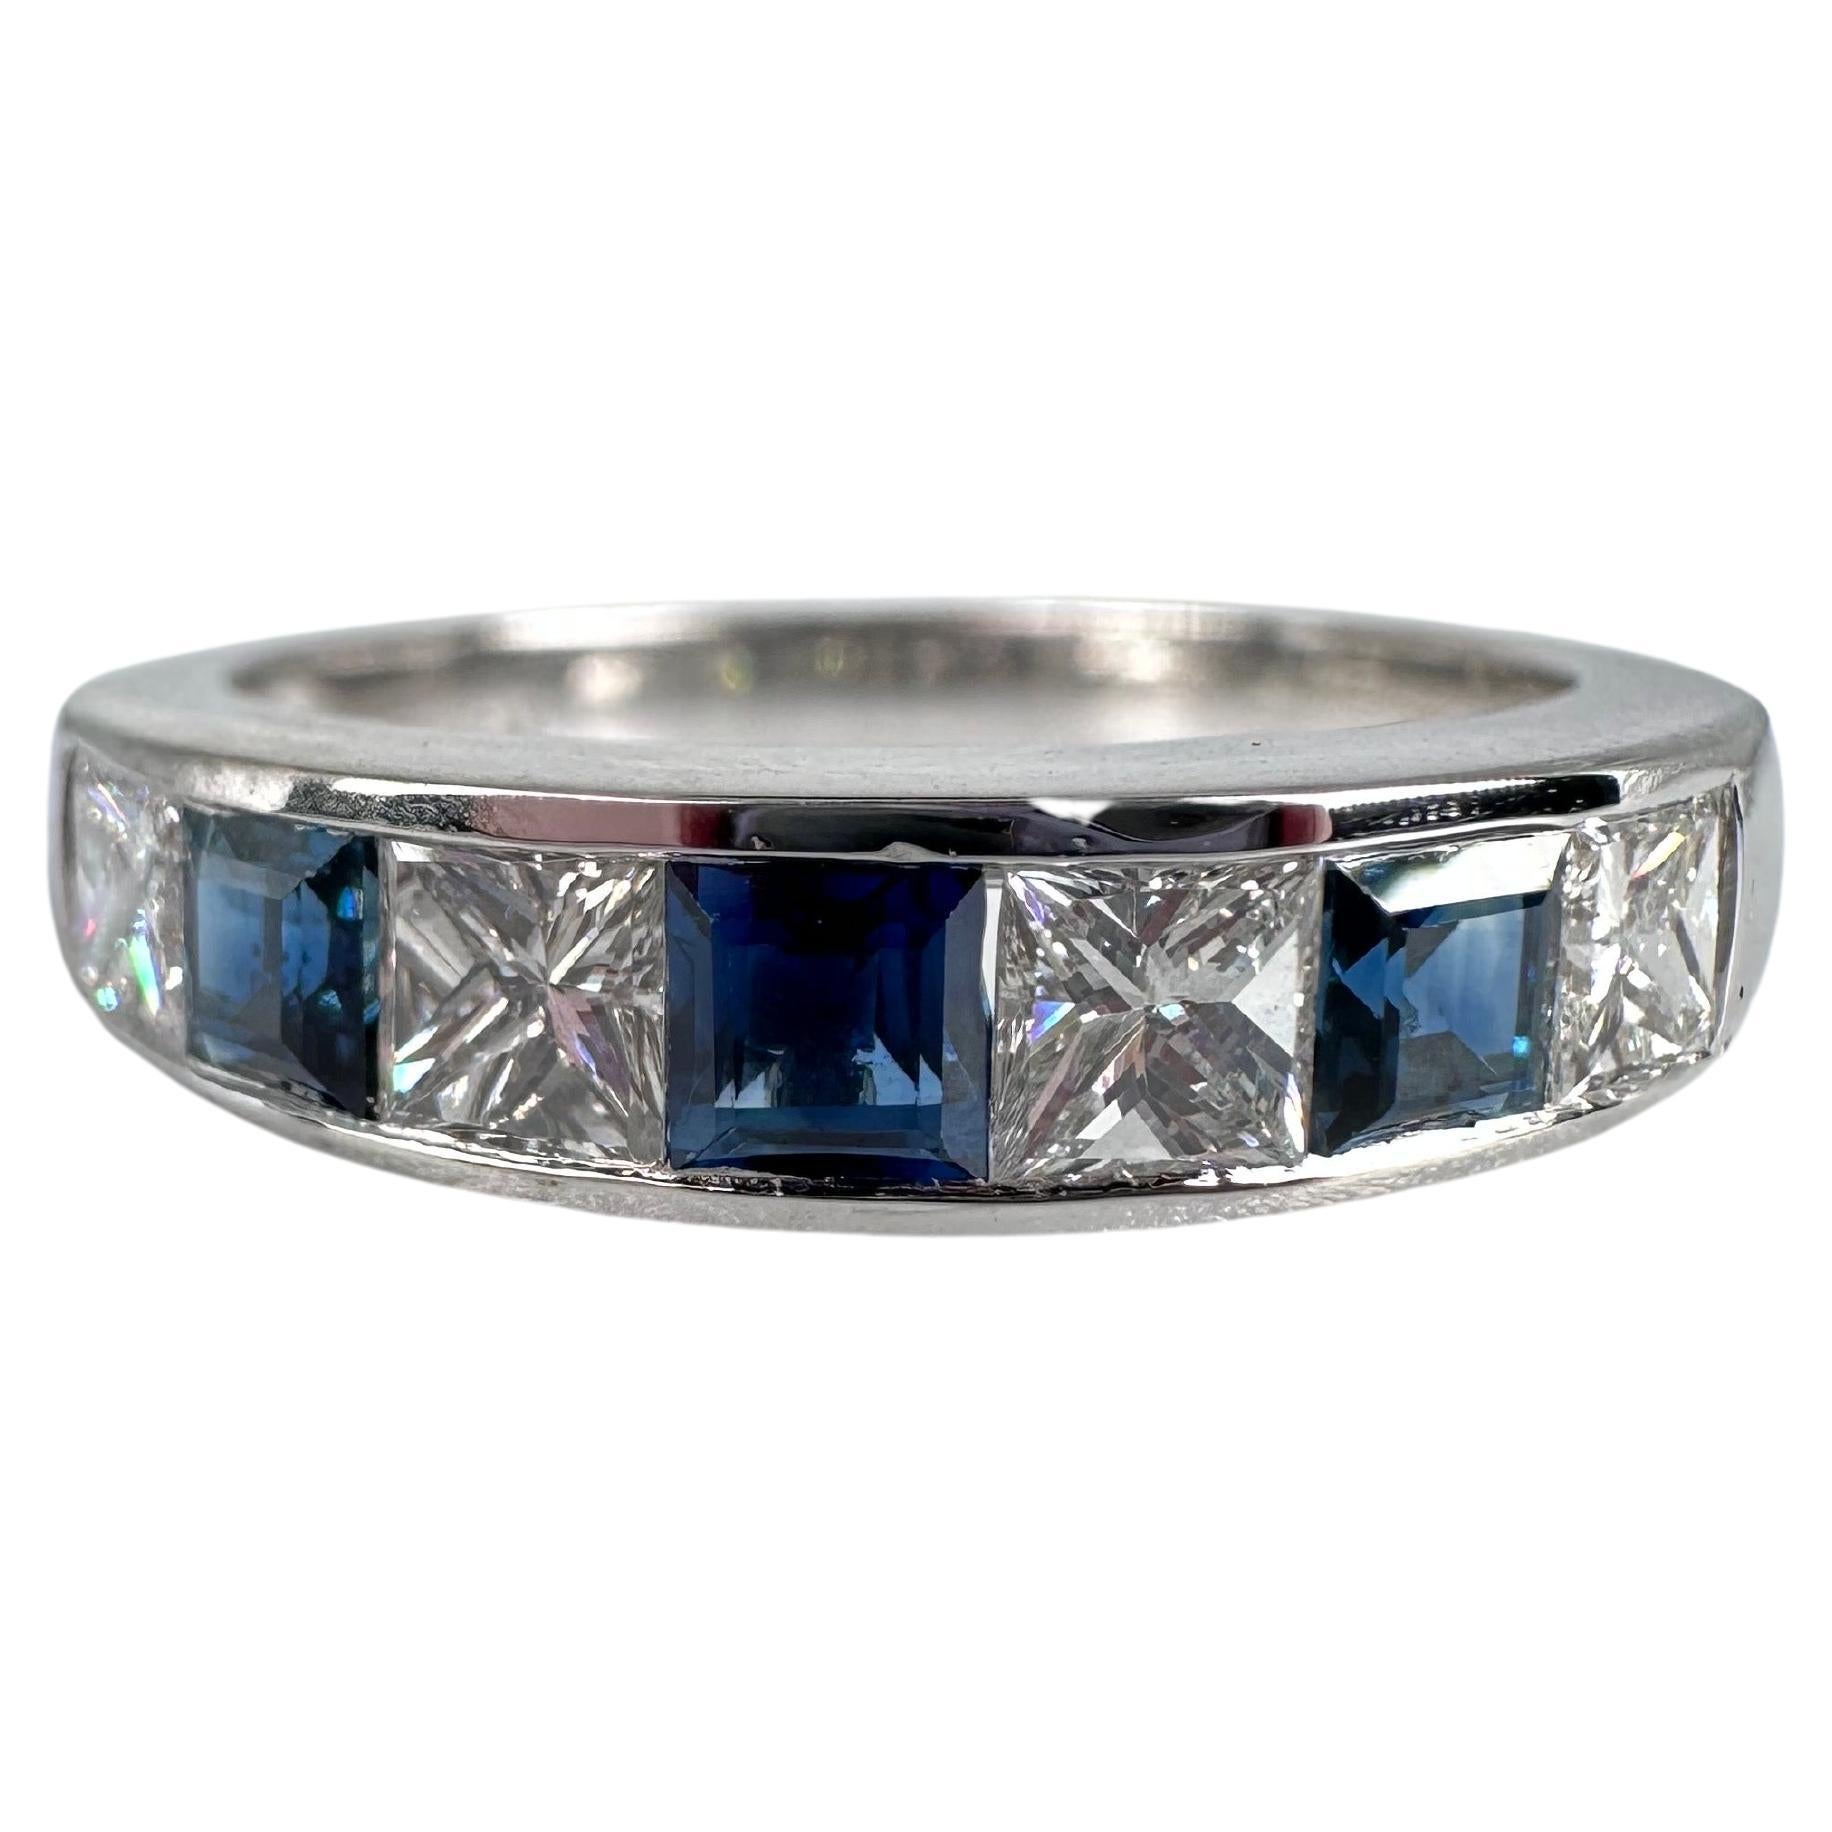 Substantial Sapphire and Diamond Wedding Band Princess Cut Stacking Ring 18kt 